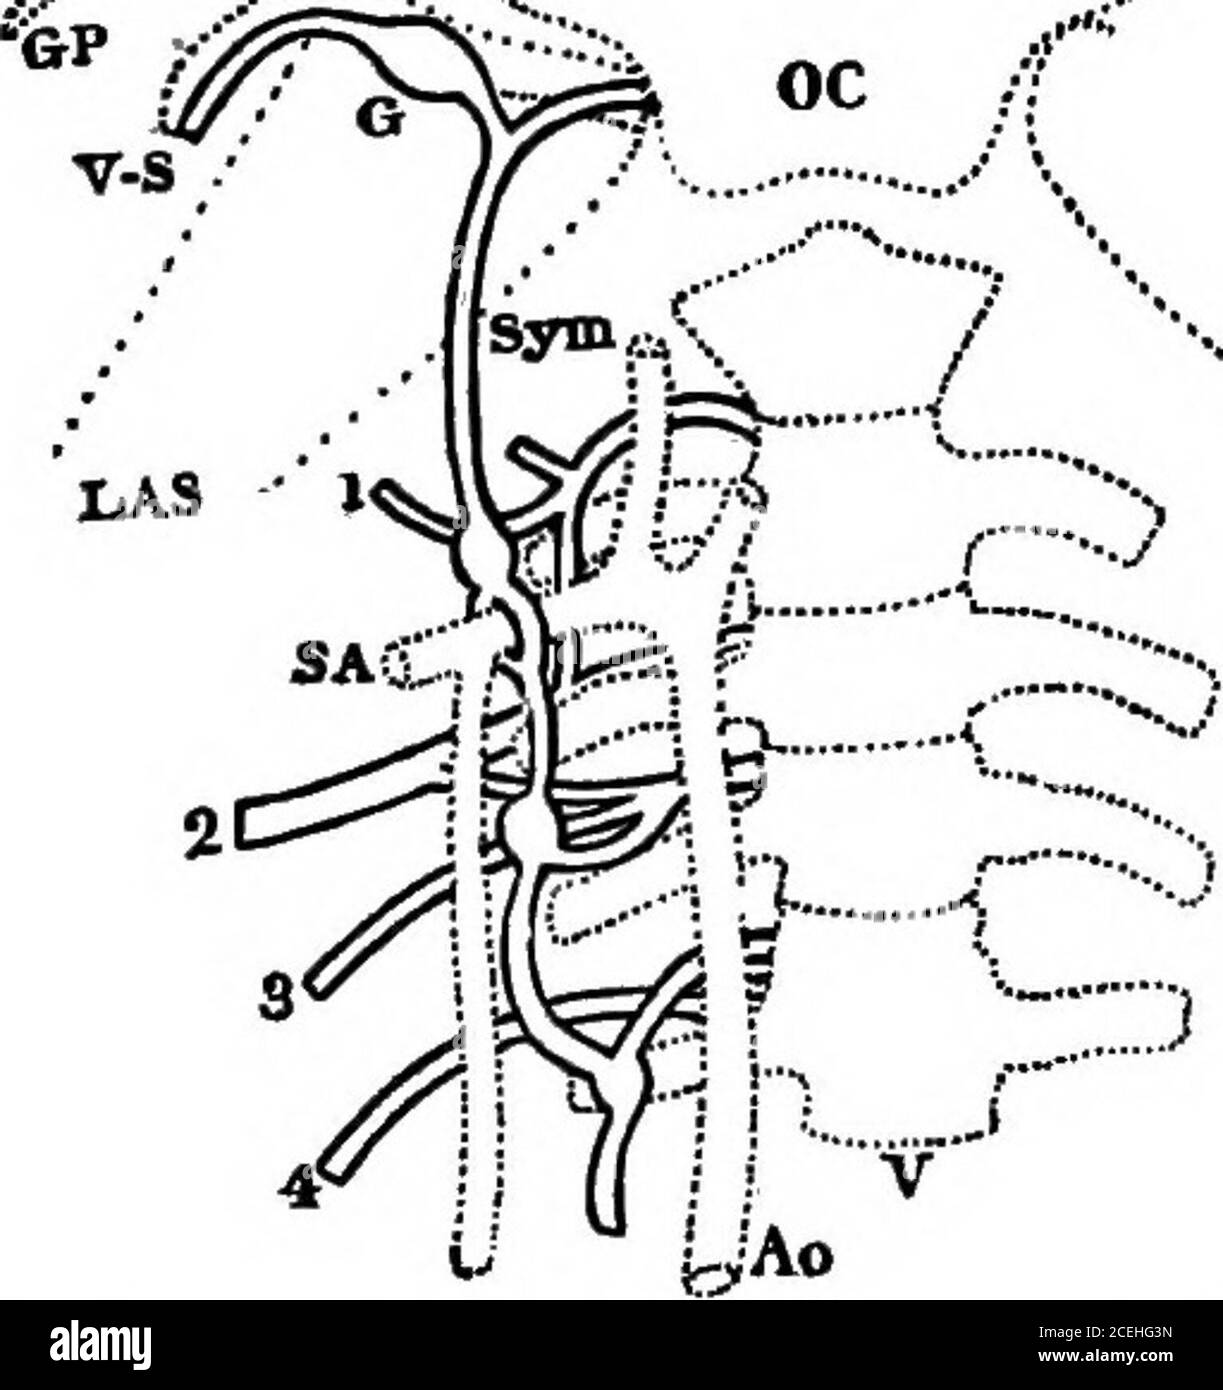 . An introductionto physiology. ain to the ganglion of thevagus (Fig. 55), and thence down the vagus trunkto the heart. Thus in the greater part of itscourse the vagus cannot be stimulated withoutexciting both the augmentor and the inhibitorycardiac fibres. To excite either alone it is neces-sary to stimulate the respective nerves abovetheir junction. Preparation of the Sympathetic. — Cut away thelower jaw of a large frog, the brain of which hasbeen destroyed by pithing, and continue the slitfrom the angle of the mouth downwards for ashort distance. Avoid cutting the vagus nerve(Fig. 56). Turn Stock Photo